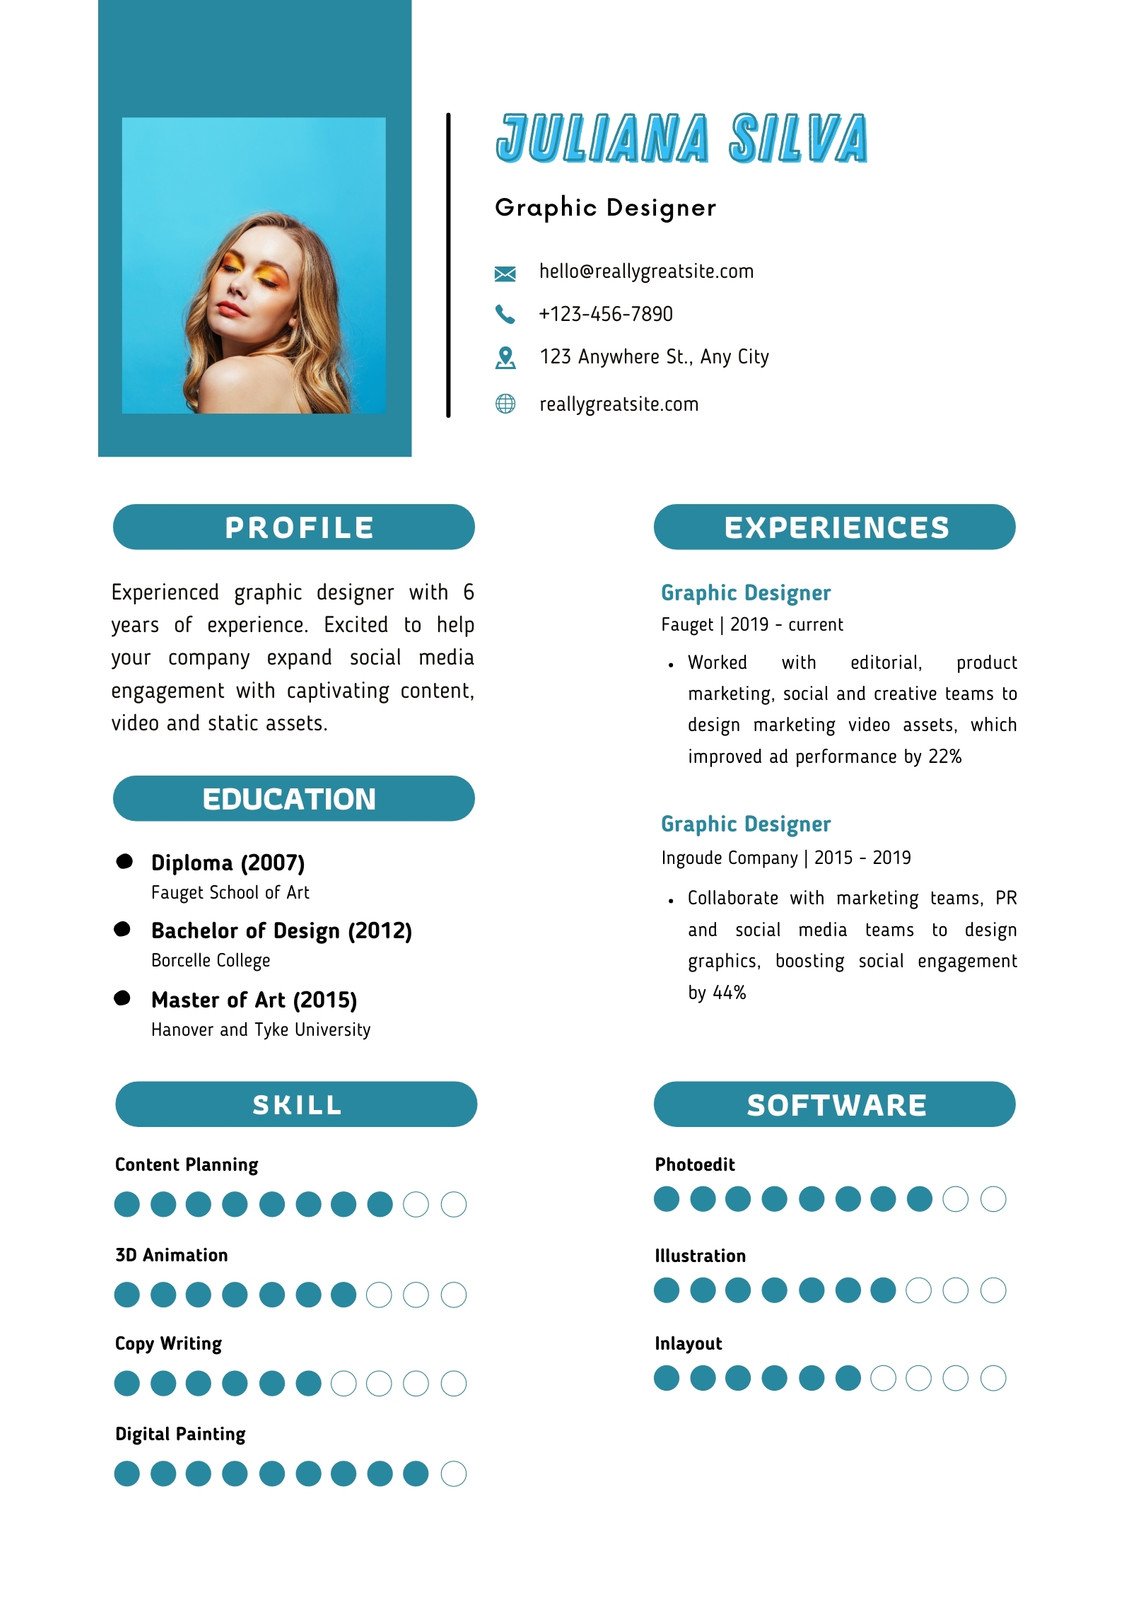 Page 14 - Free, custom professional infographic resume templates | Canva